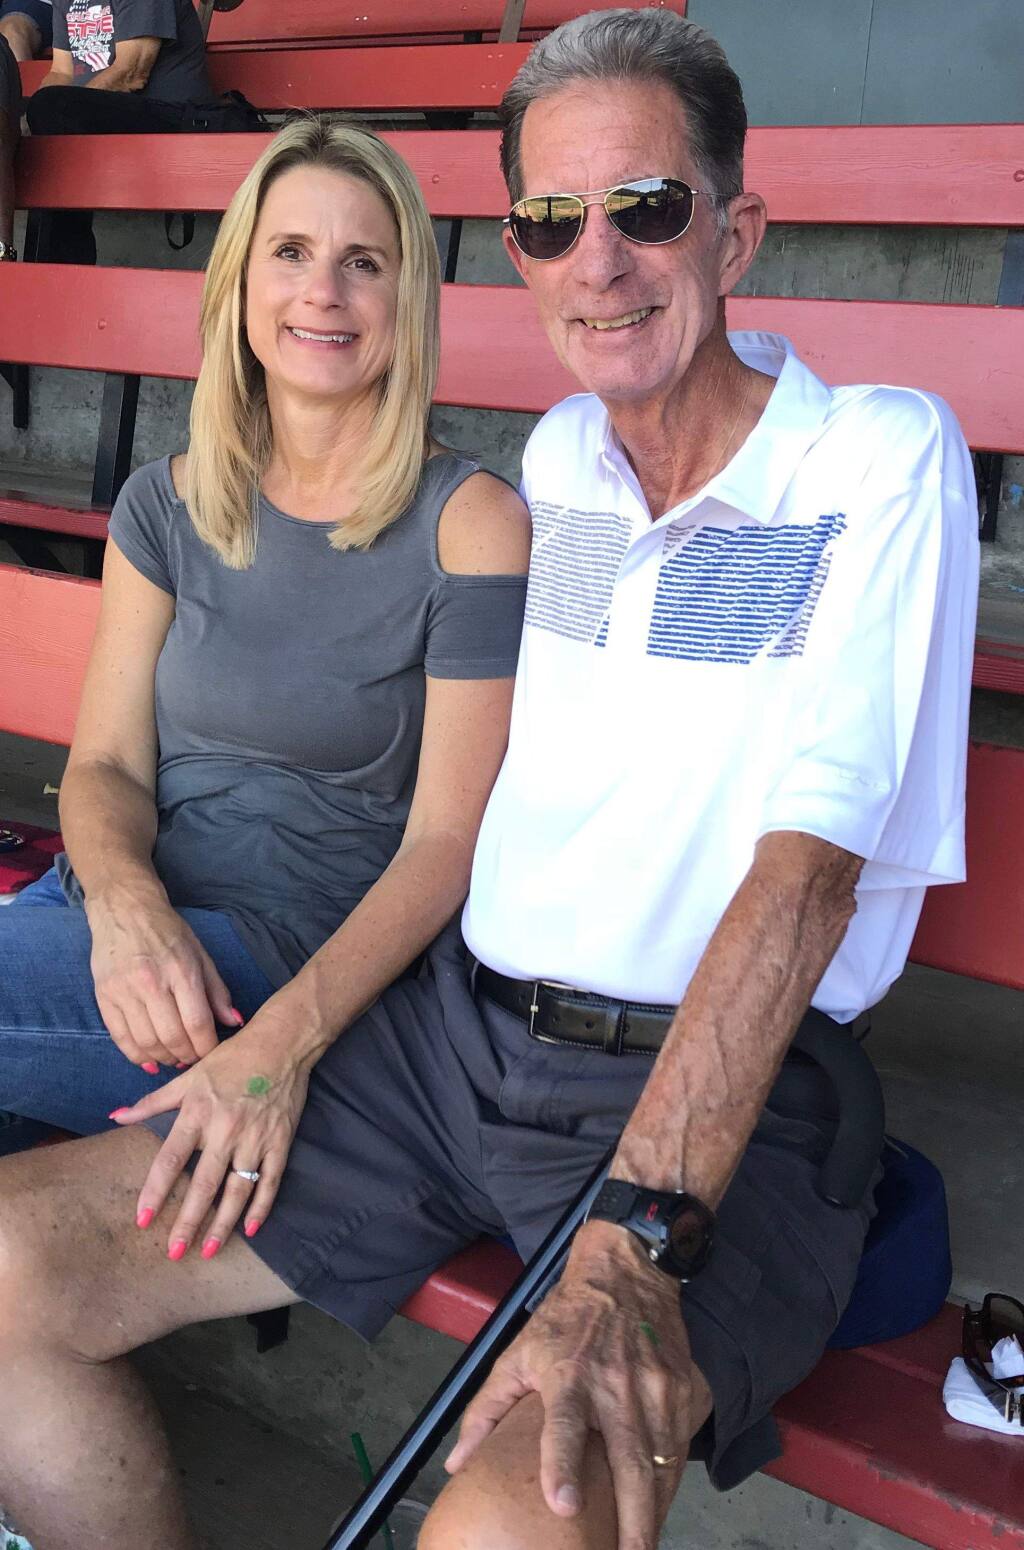 Pete Dardis and his wife, Marina, sit at a baseball game in Yountville on July 26. (Photo from Dardis family)